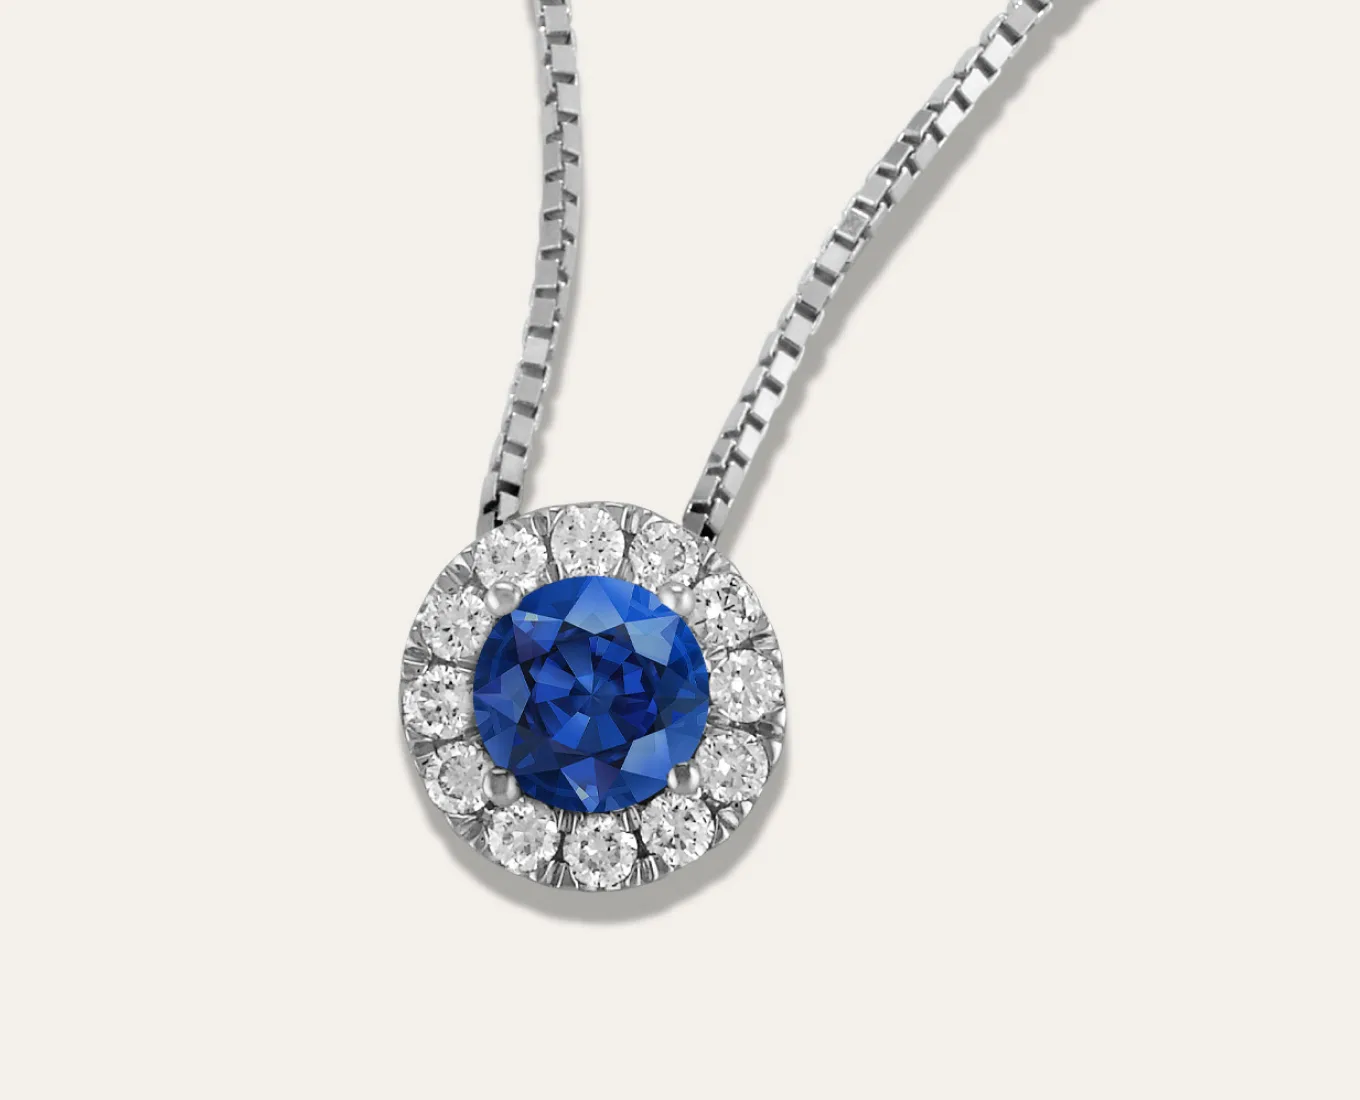 Leda Pick-Your-Gem Halo Pendant (5mm Round) Featuring a Sapphire Center Stone. Natural diamonds will add sparkle to a birthstone or a favorite gemstone in this beautiful halo pendant. Crafted in bright 14-karat white gold, it comes on a matching box chain. For more information on selecting your gemstone, Live Chat online, call a customer service representative at 1-866-467-4263, or visit one of our store locations.